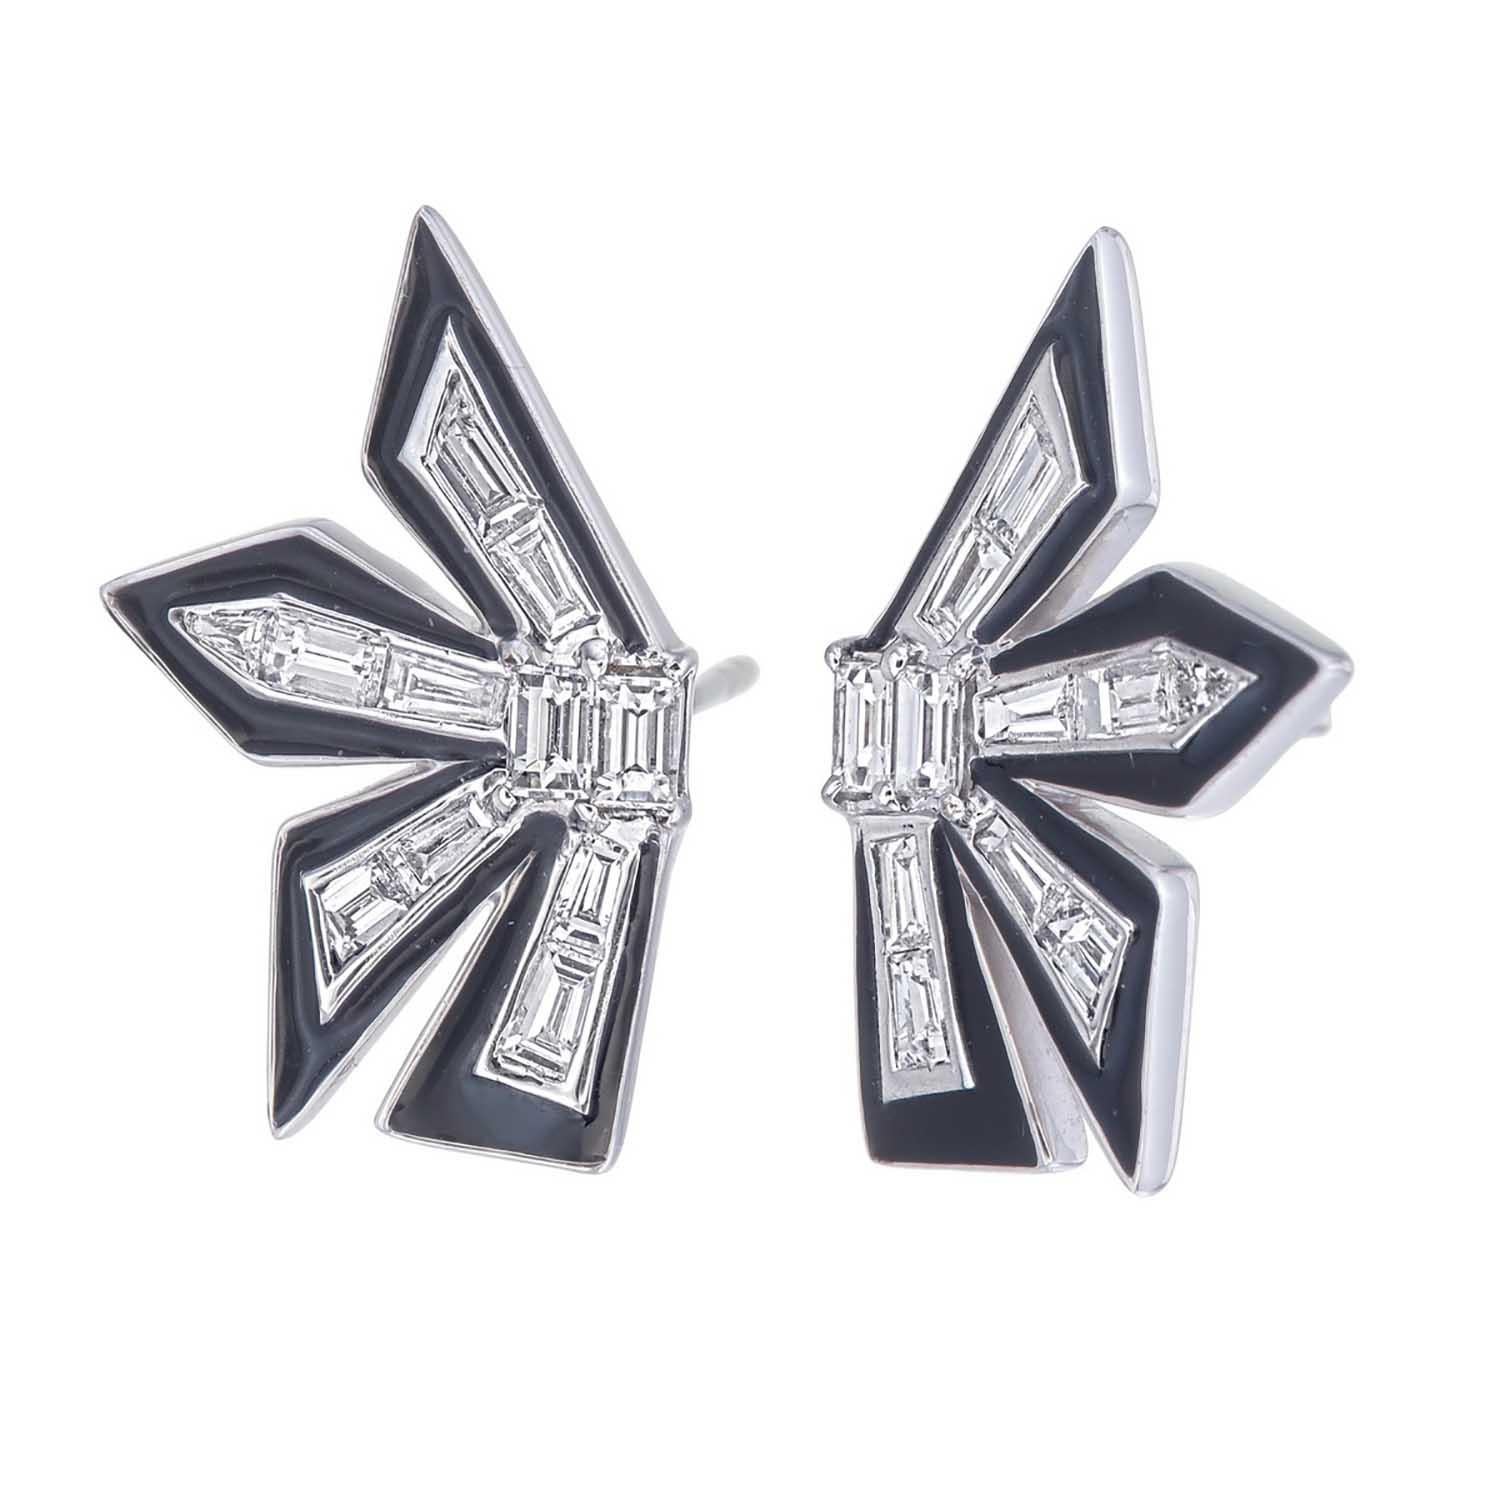 One of its kind earrings crafted in 18kt white gold.
This pair of dynamite earrings are handmade with trillion & baguatte cut diamonds with each diamond recut to bring this fire.
Each spoke is tipped with glossy black enamel to highlight the